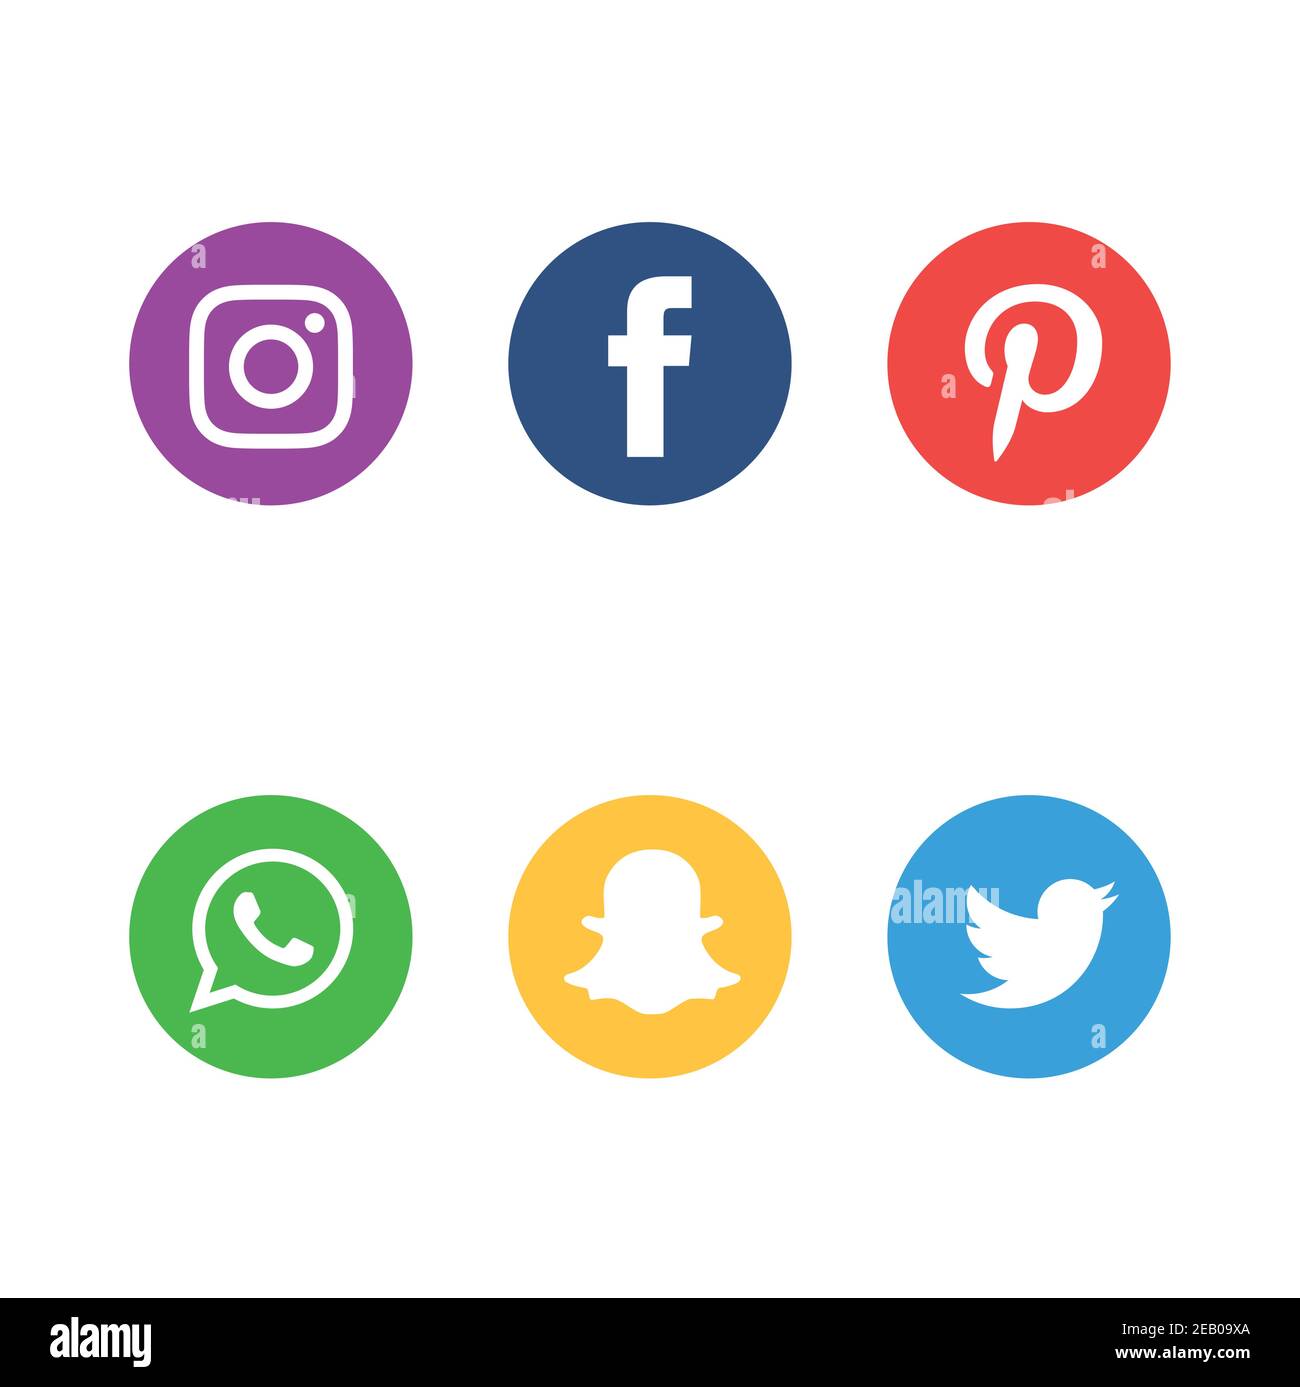 Set of popular social media icons. Instagram, Facebook, Twitter, Snapchat, WhatsApp and Pinterest icons. Stock Vector